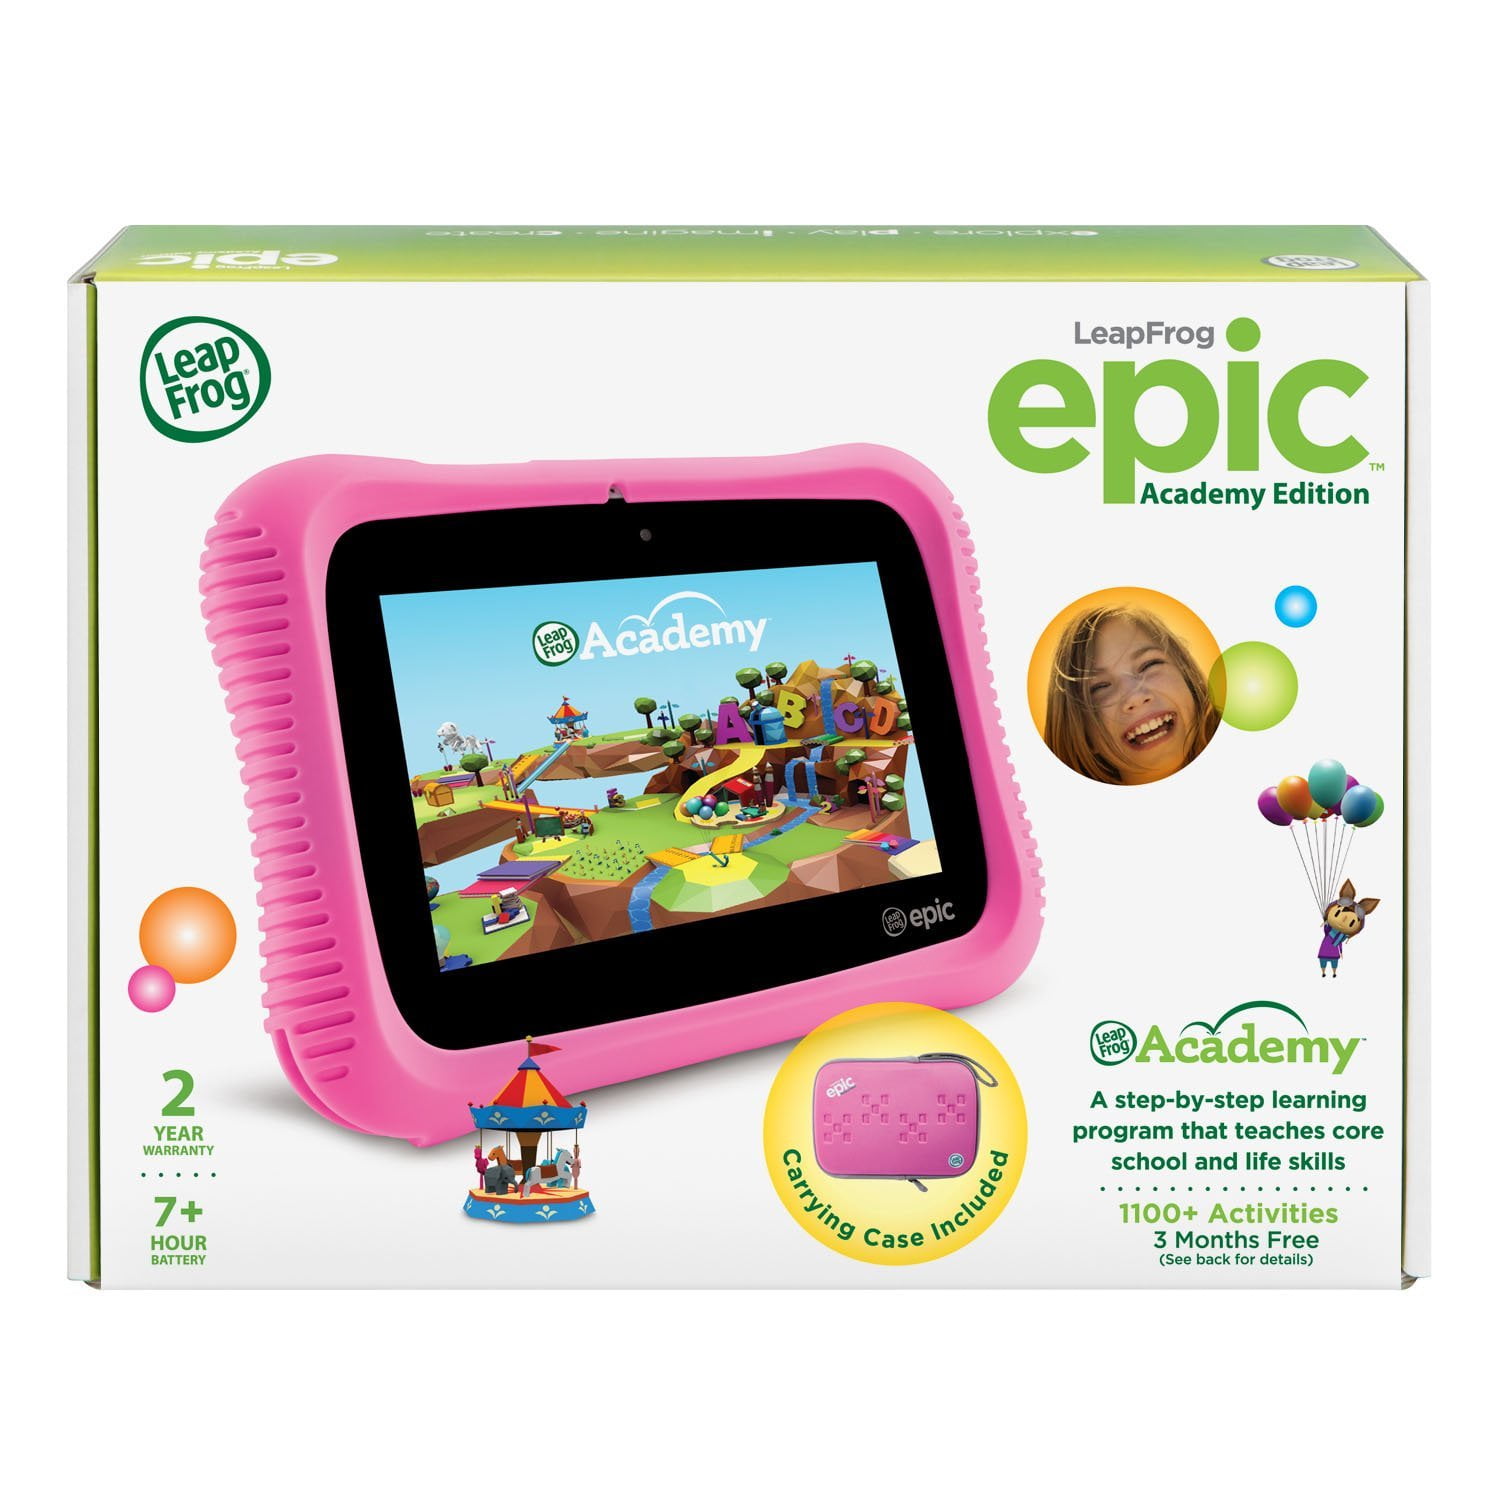 Leapfrog Epic Academy Edition 7" Learning Tablet Tested/Working Open Box